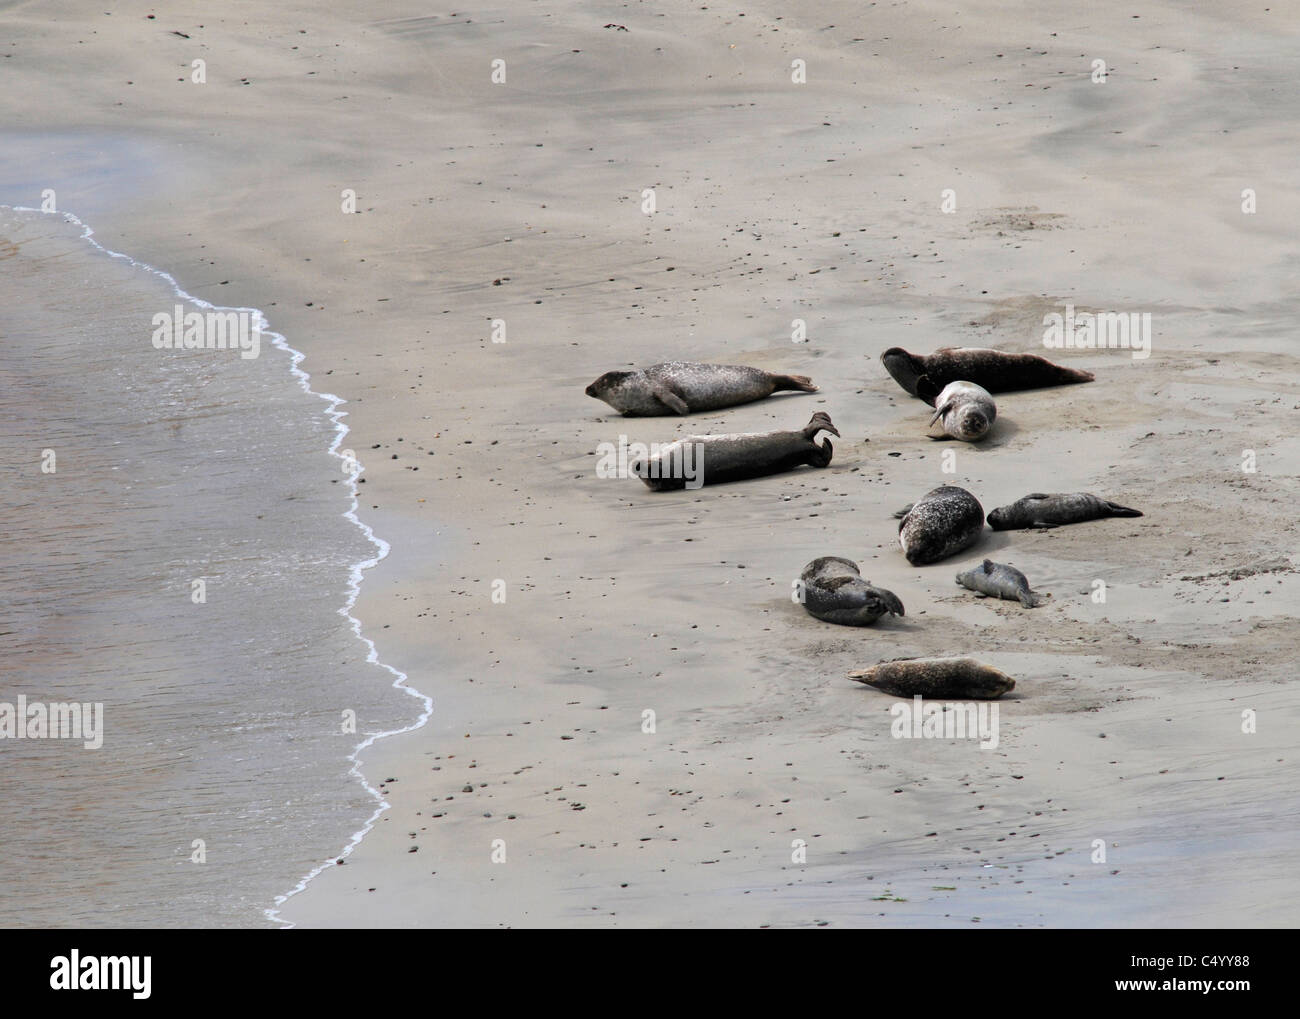 Common or Harbour seals and pups on the Bay of Scousburgh beach on the Shetland Isles. Scotland  SCO 7376 Stock Photo